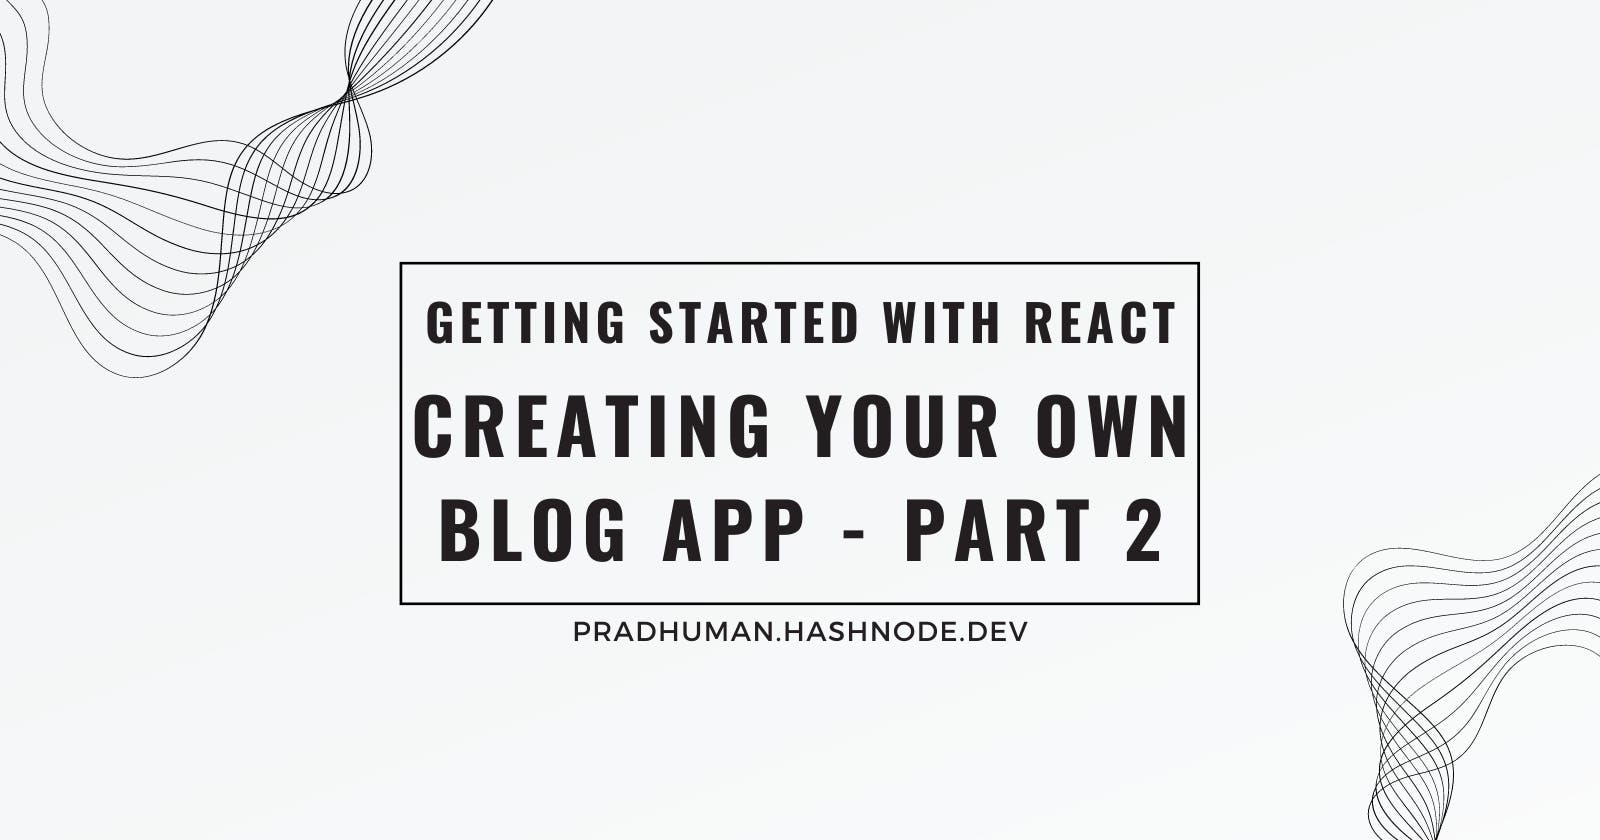 Getting Started with React: Creating Your Own Blog App - Part 2